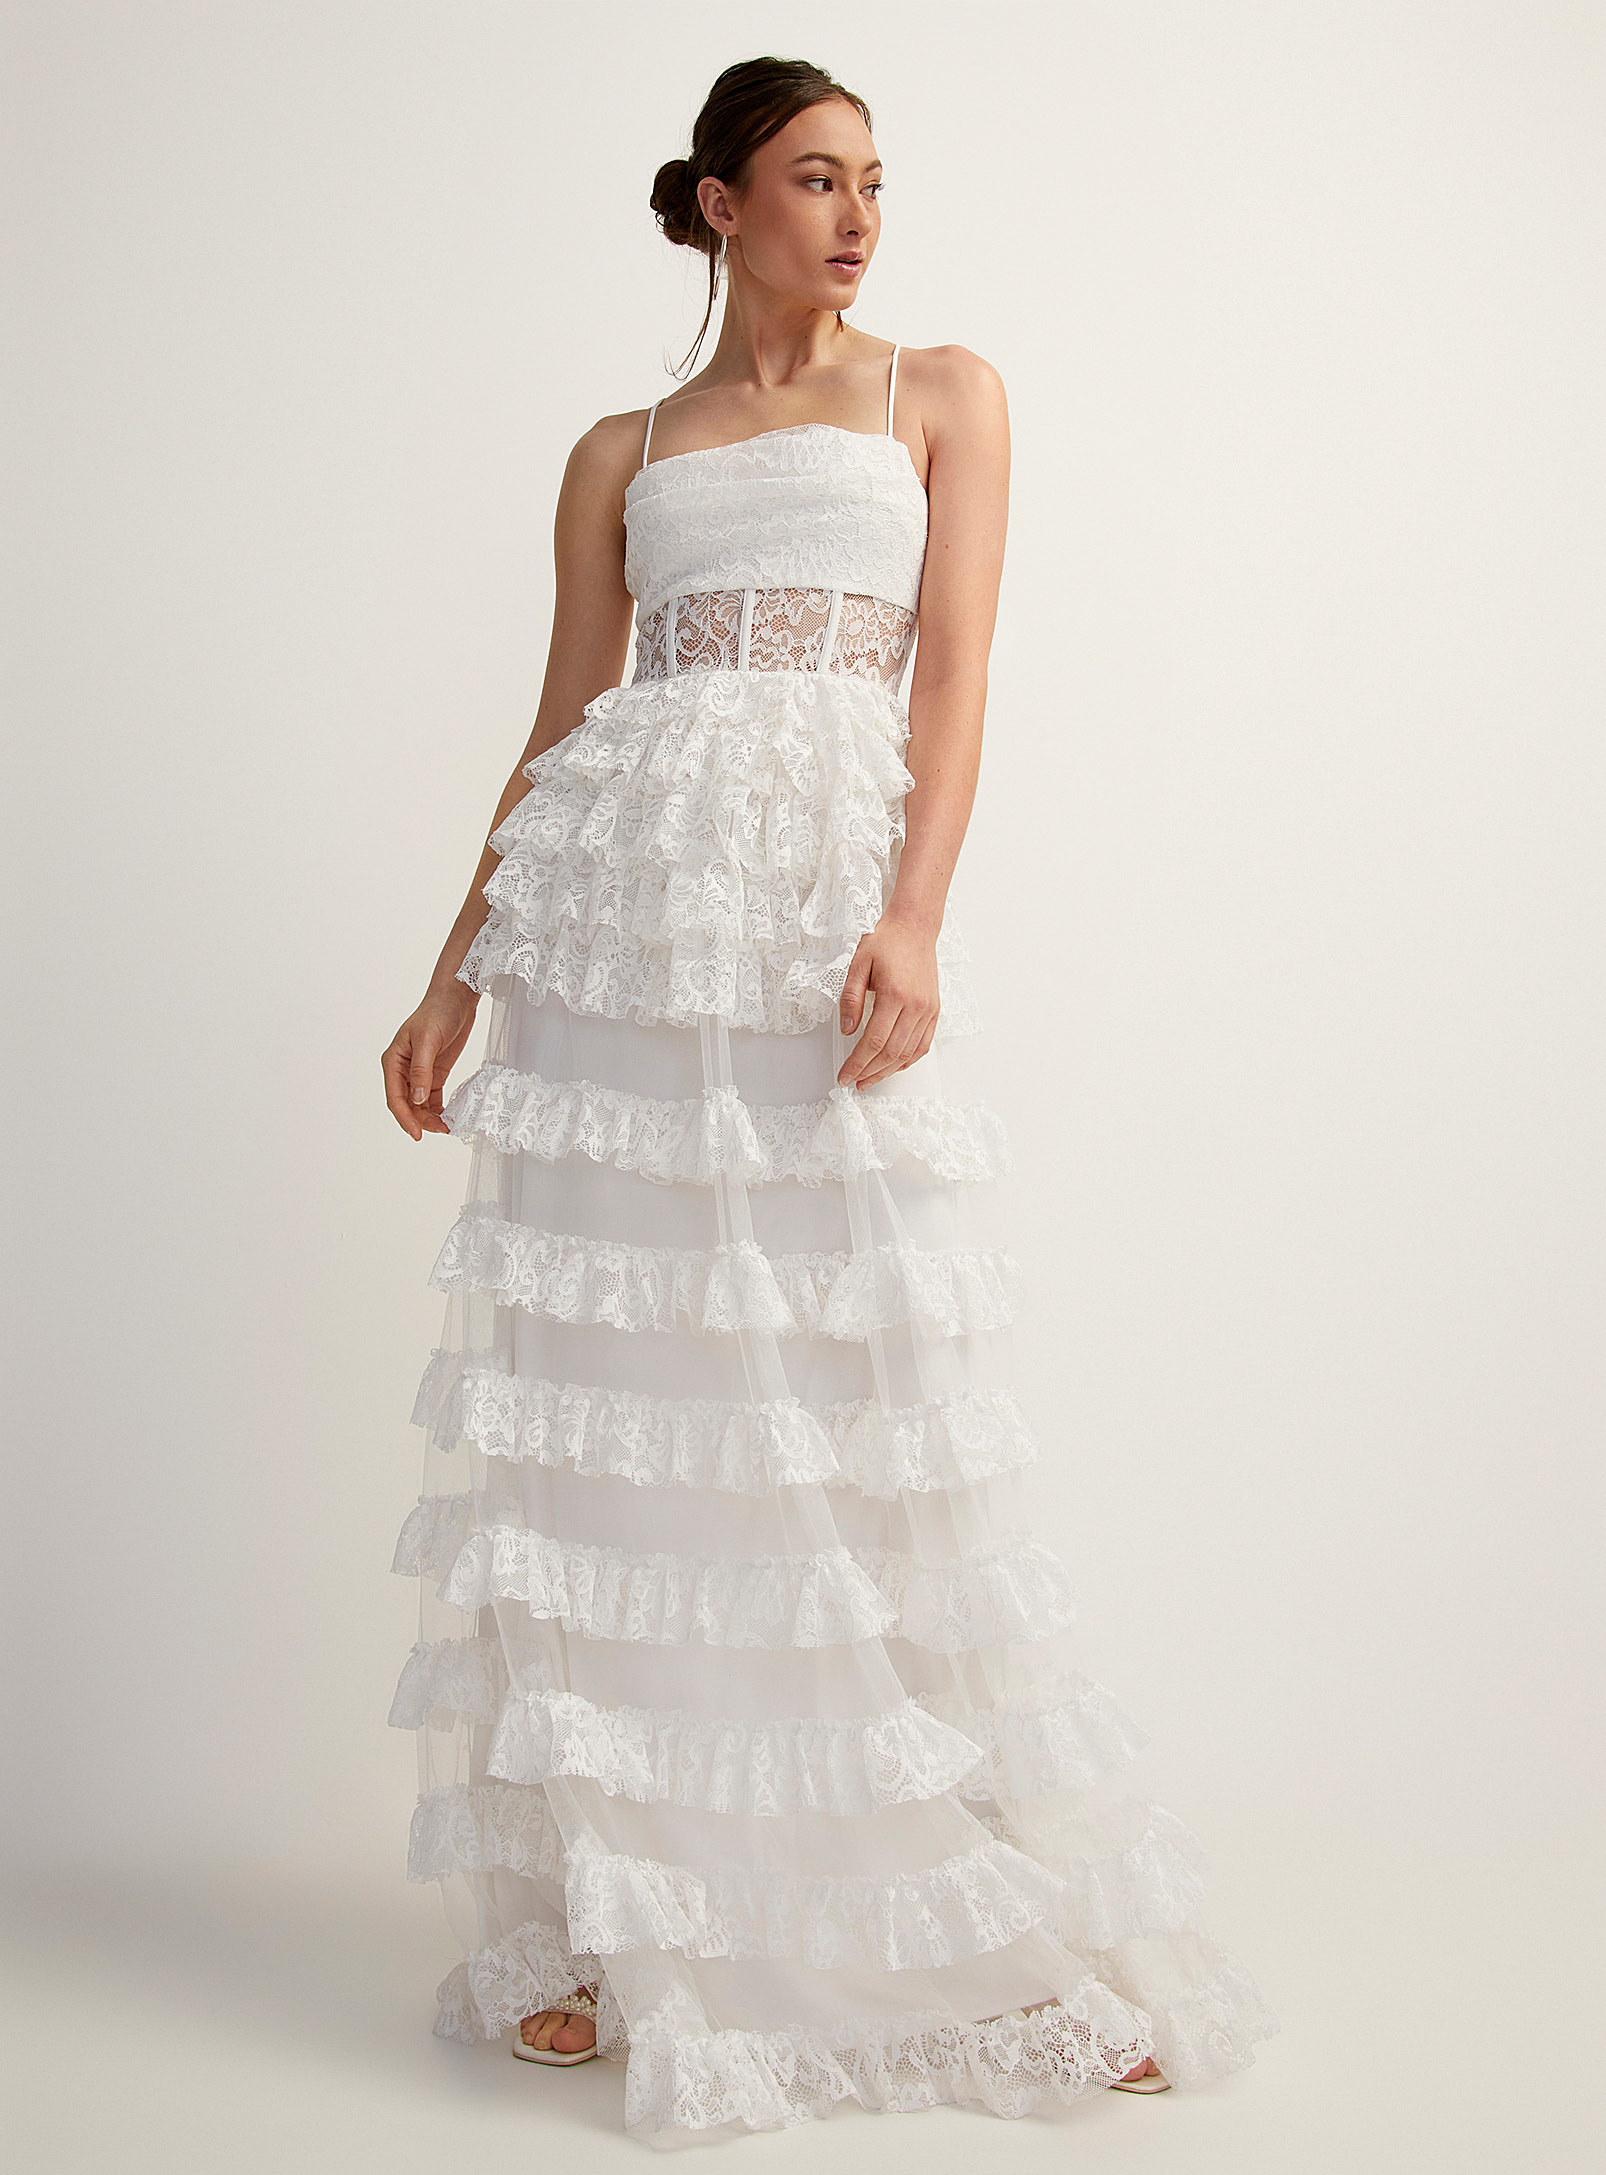 Icone Tiered White Lace Maxi Dress